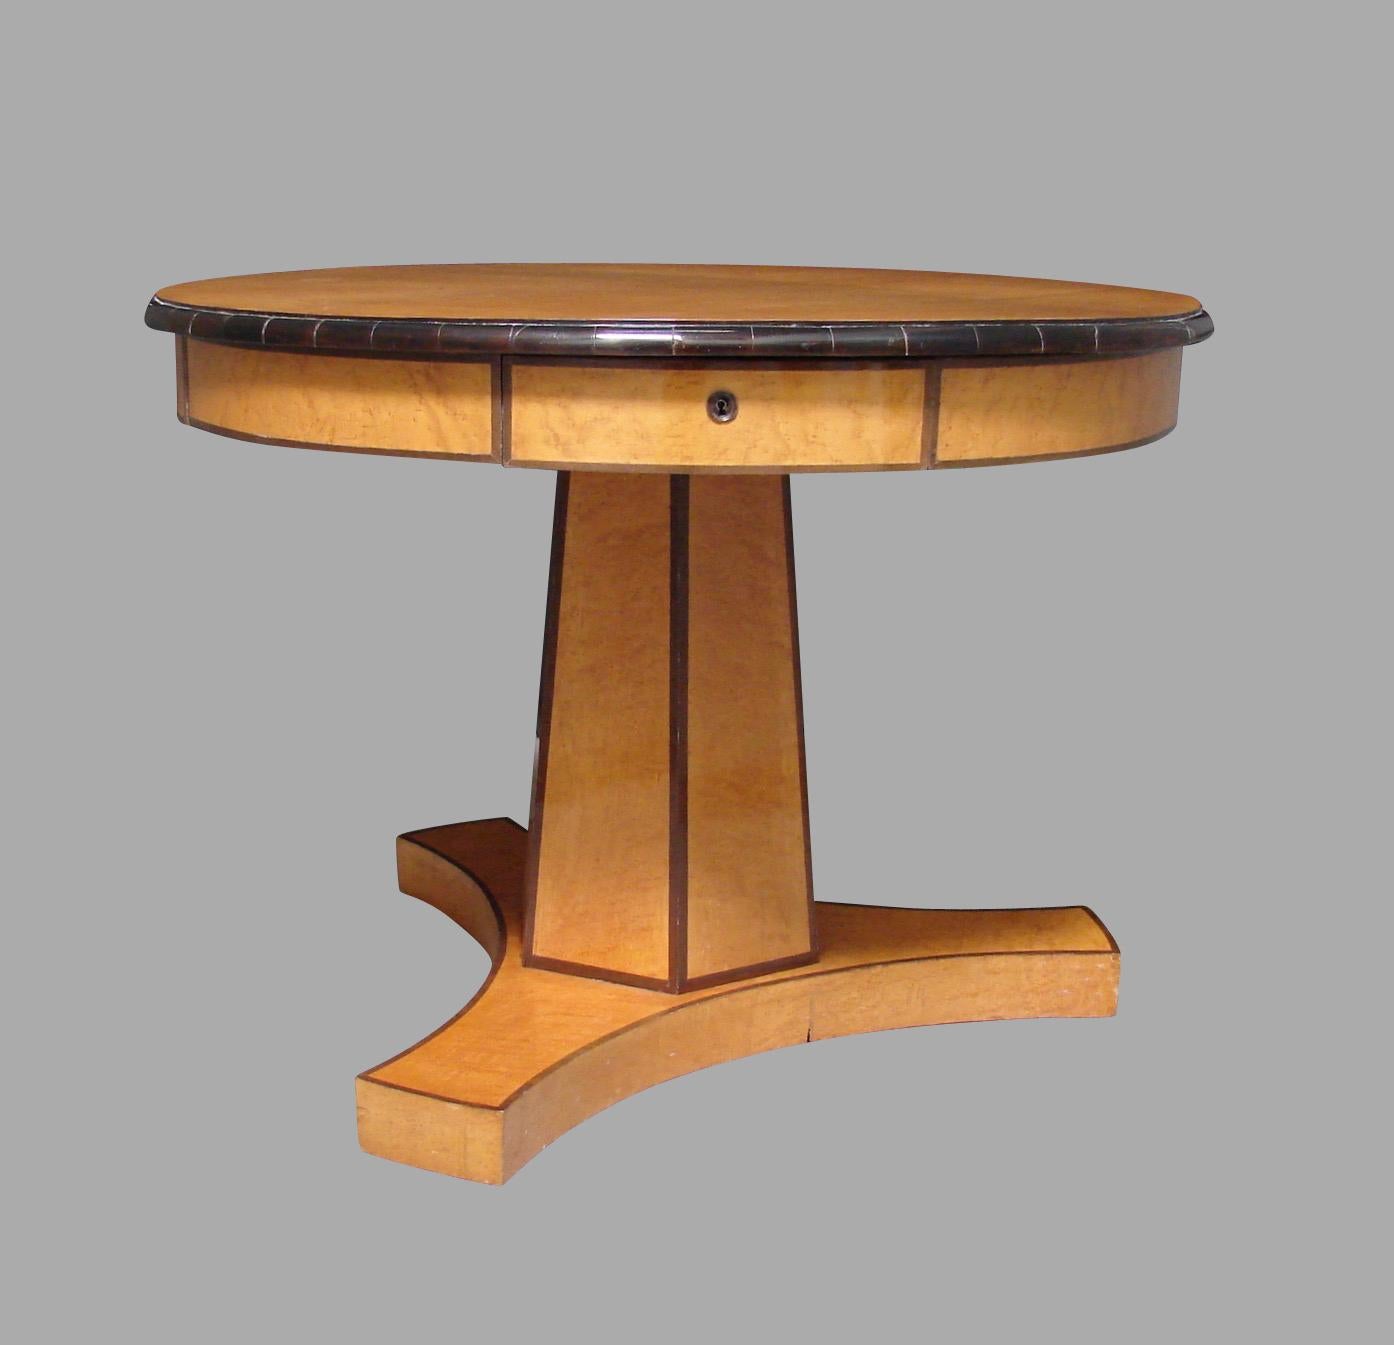 A good quality Austrian Biedermeier satin birch or maple center table, the top with an ebonized edge above 4 functional drawers resting on a hexagonal column ending in a tripod base resting on later casters. This is a stylish and elegant piece of